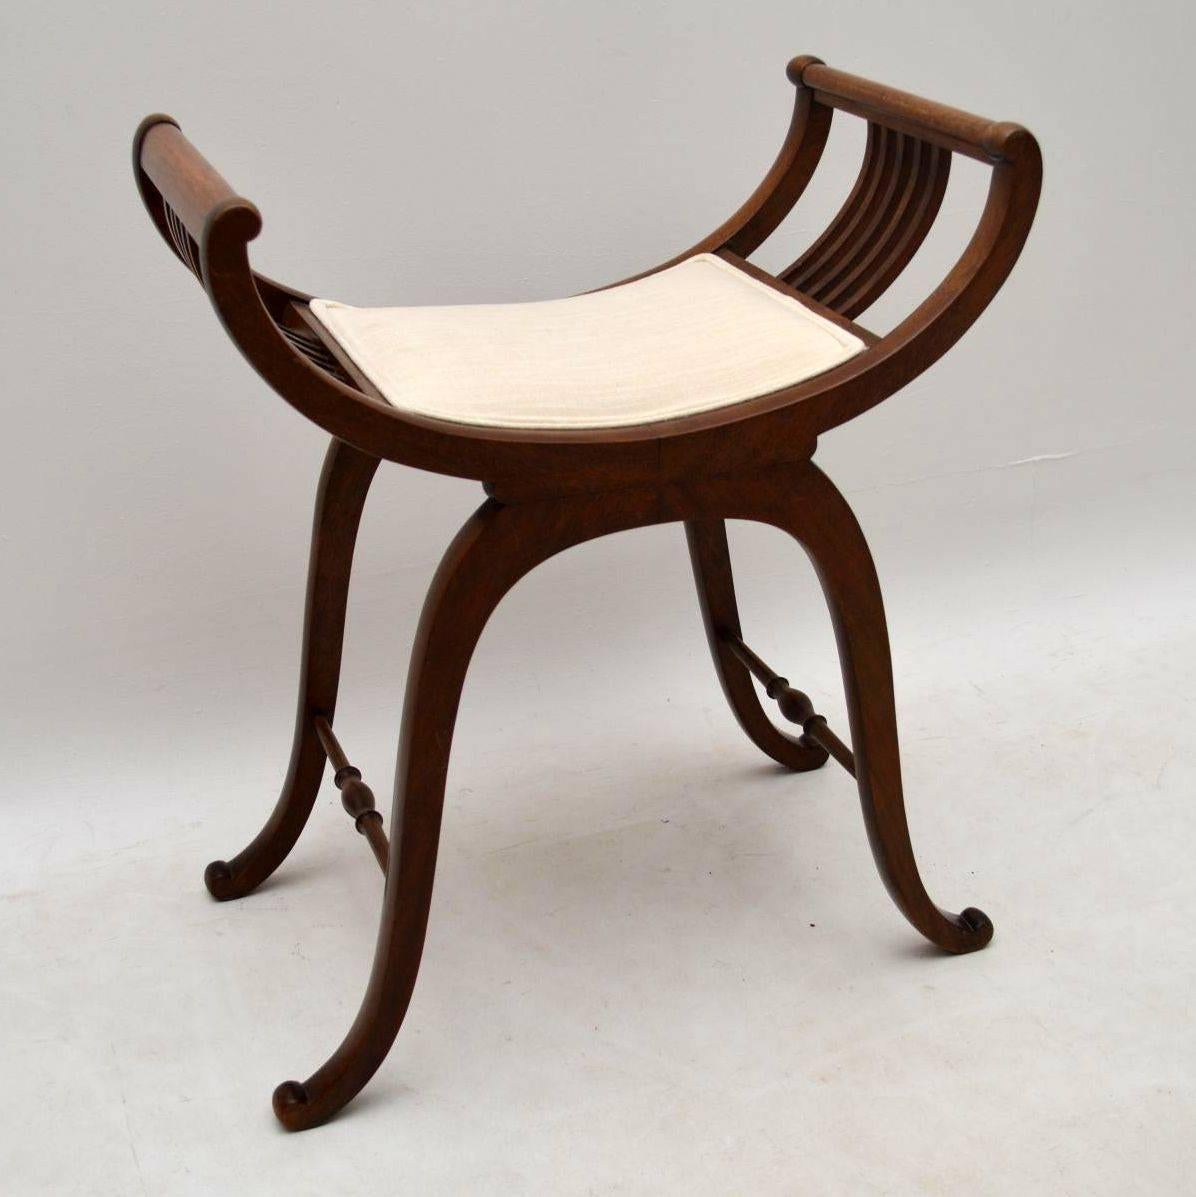 This antique Edwardian mahogany stool is very elegant and has a beautiful design. The top has a gondola shape with a newly upholstered seat and curved struts. The legs are well shaped too and have turned cross stretchers which help give it more